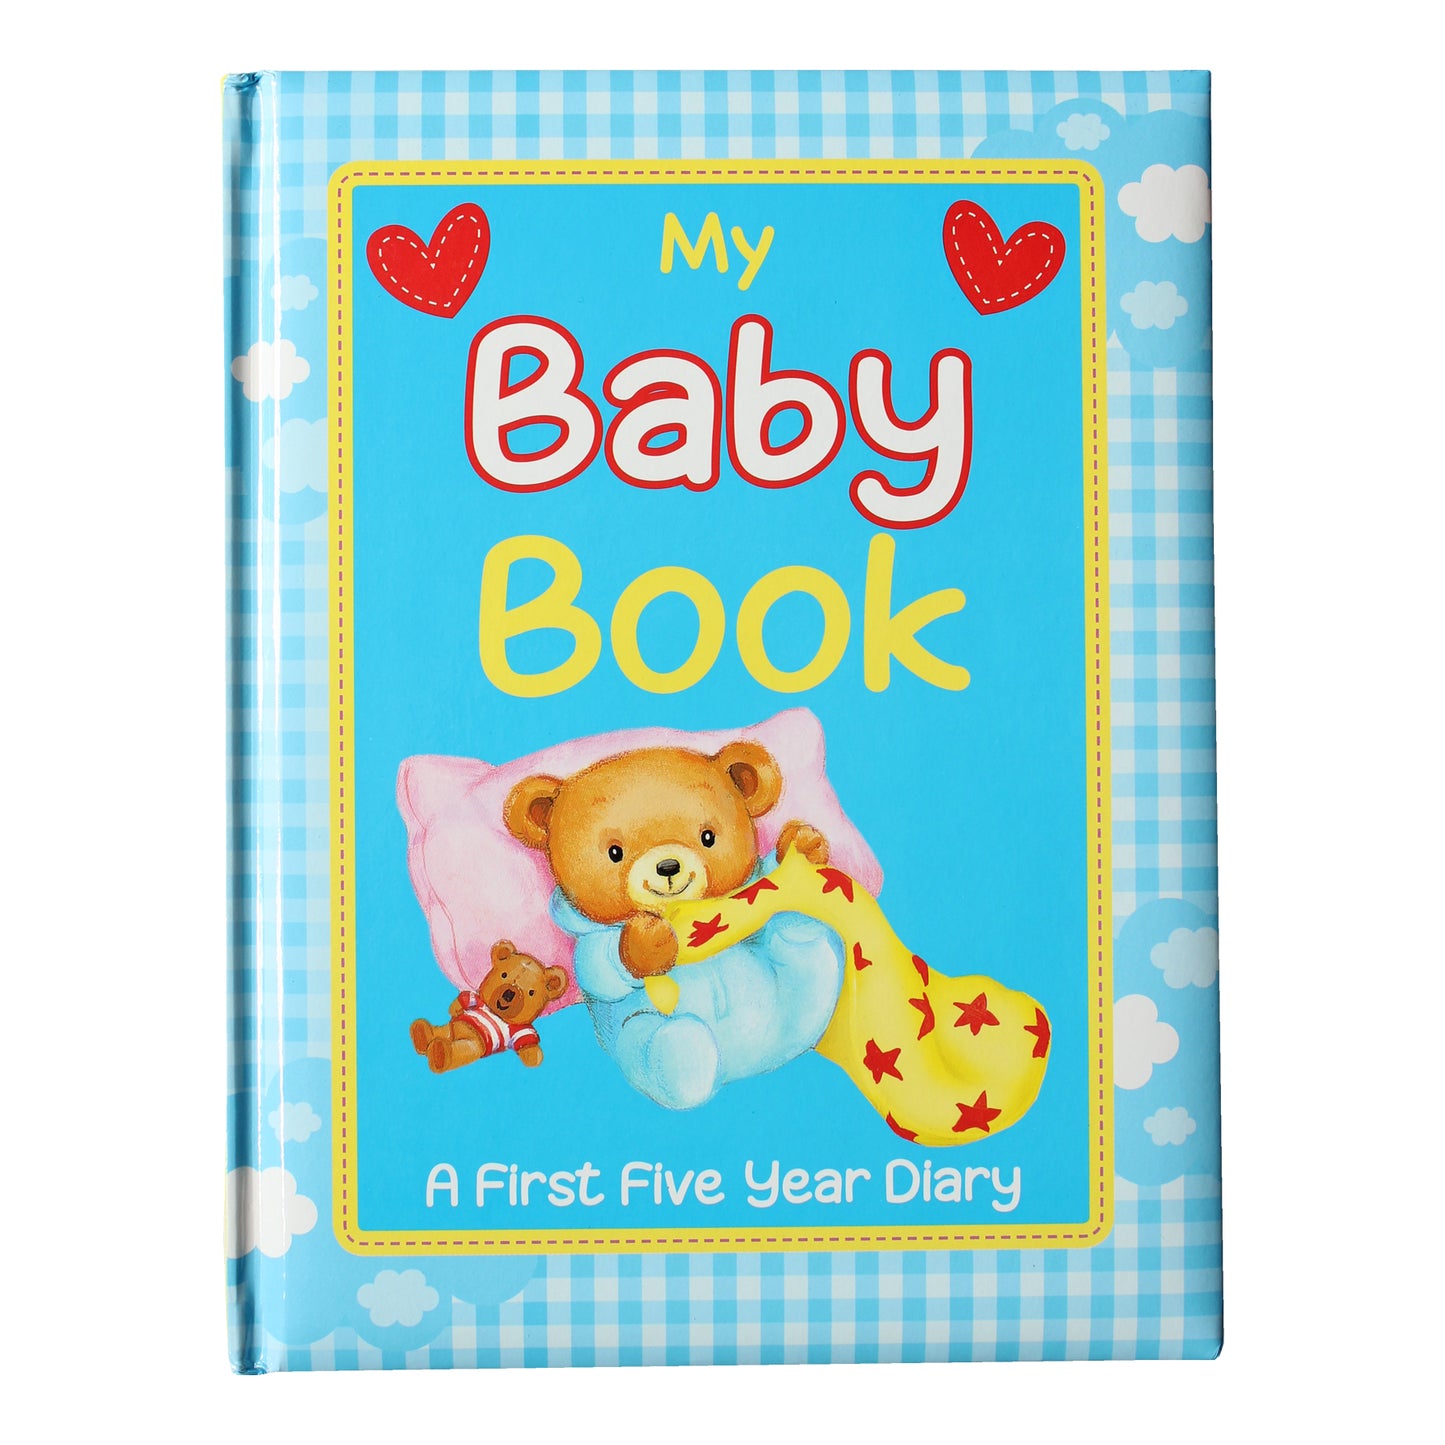 Bw My Baby Book A First Five Year Diary